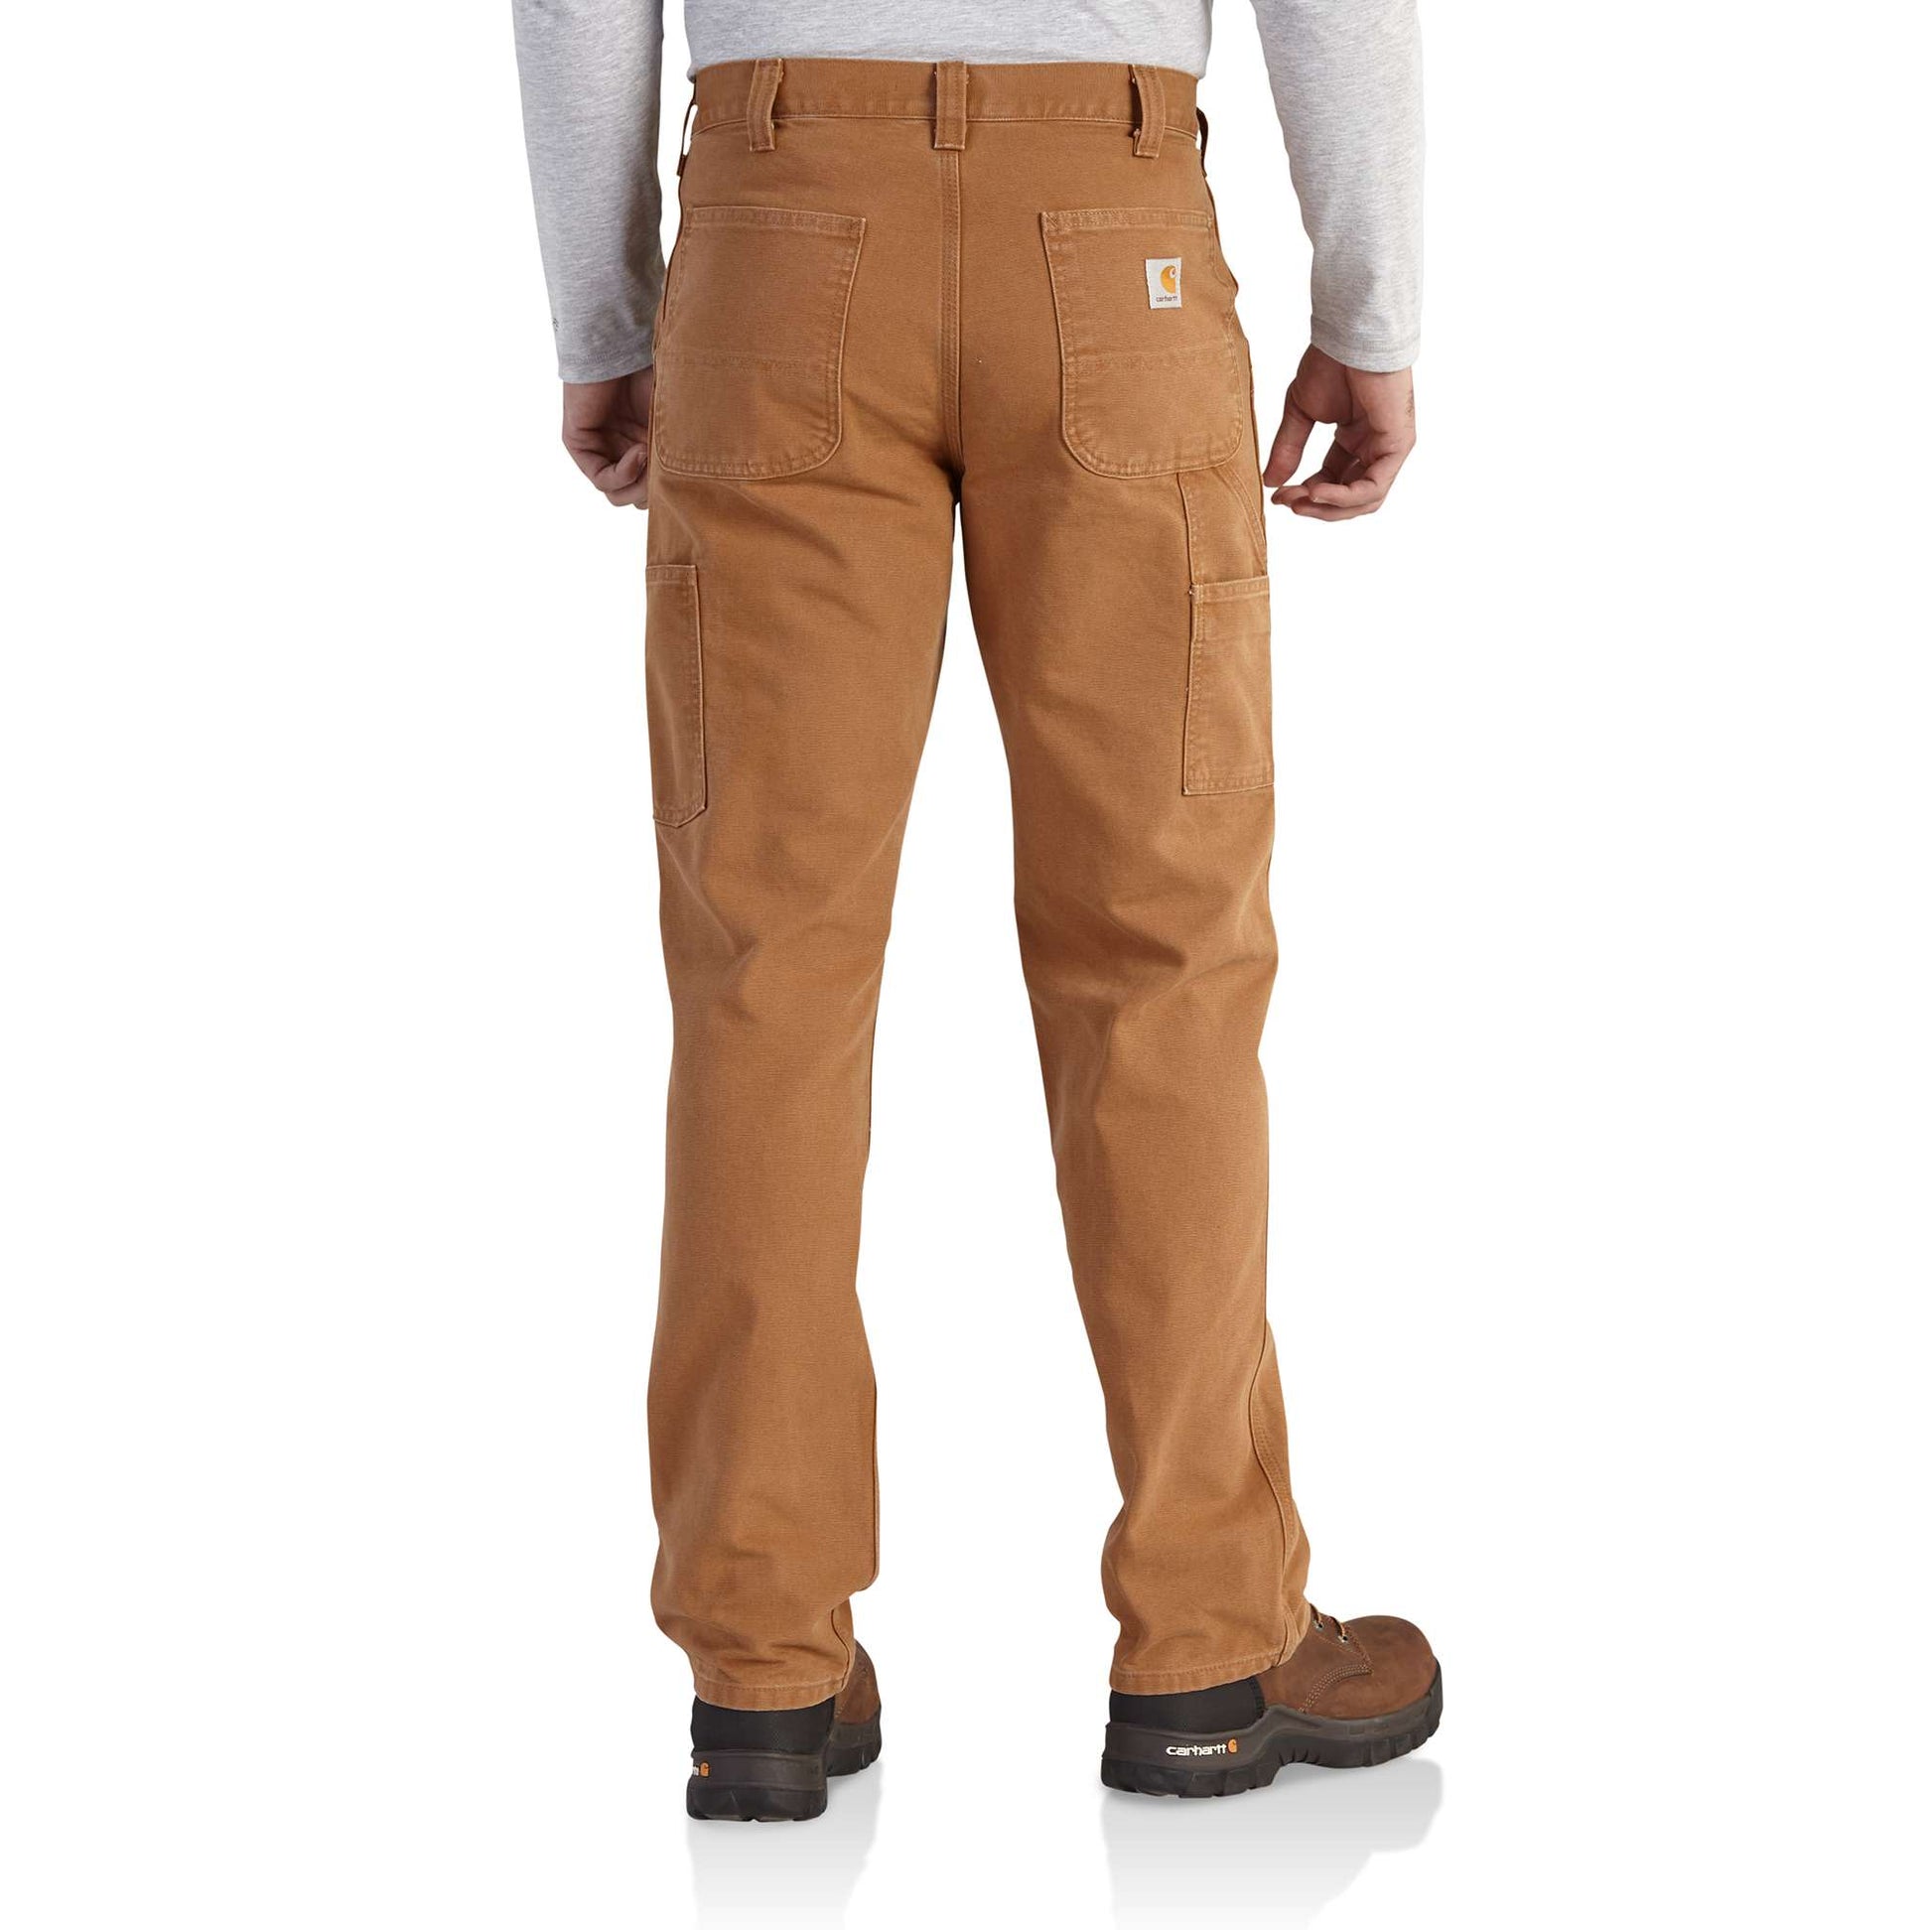 Carhartt Brown Washed-Duck Work Dungaree